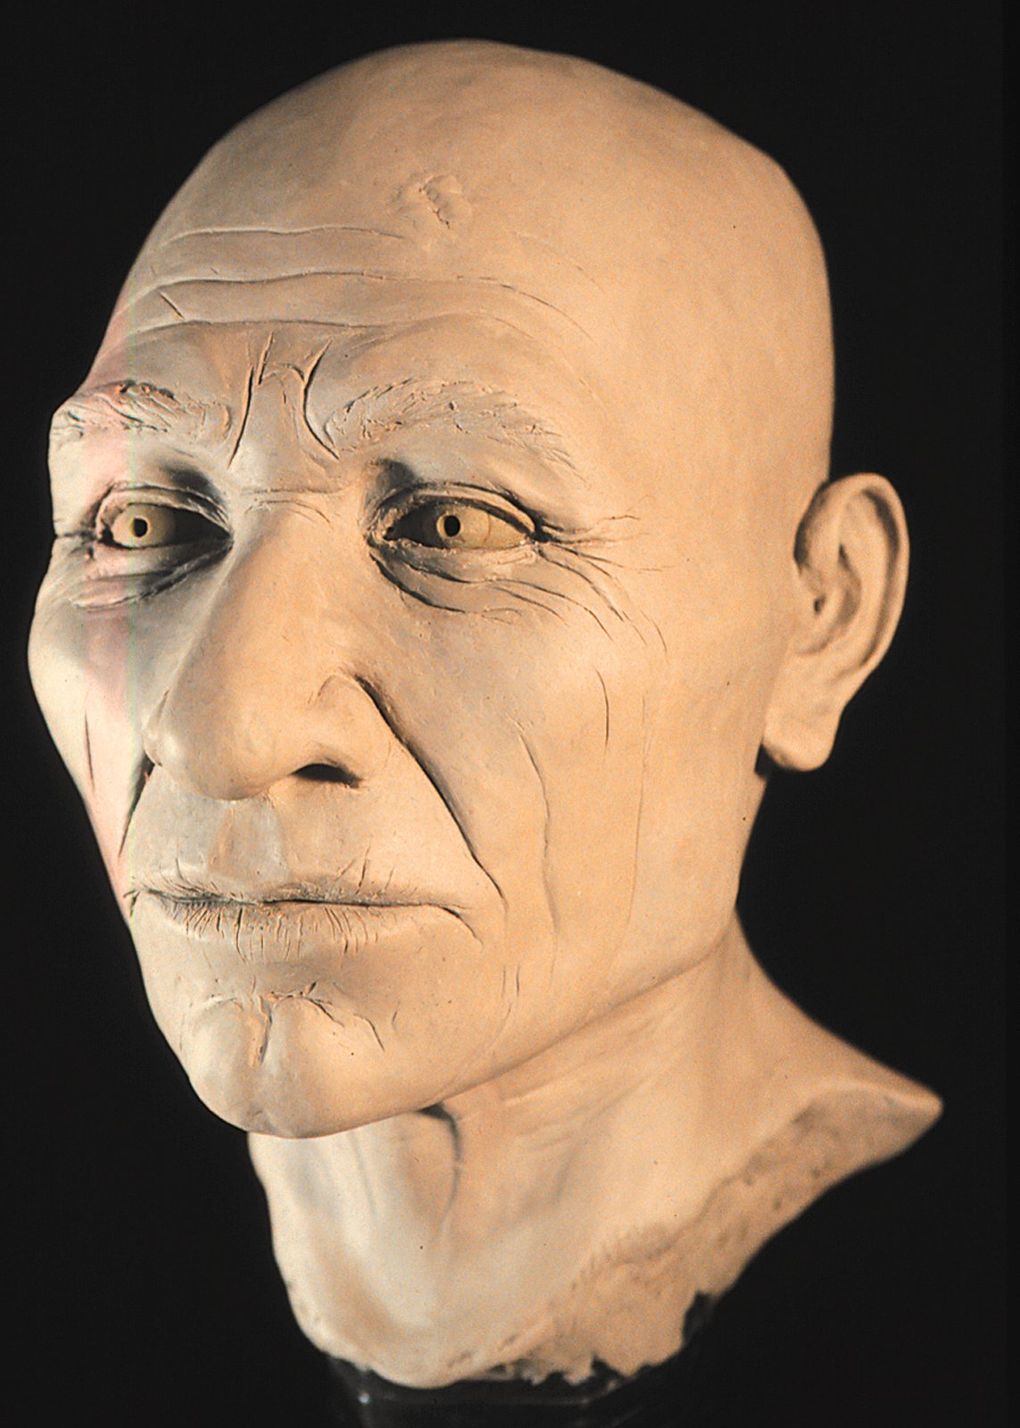 Tribes bury remains of ancient ancestor, also called Kennewick Man